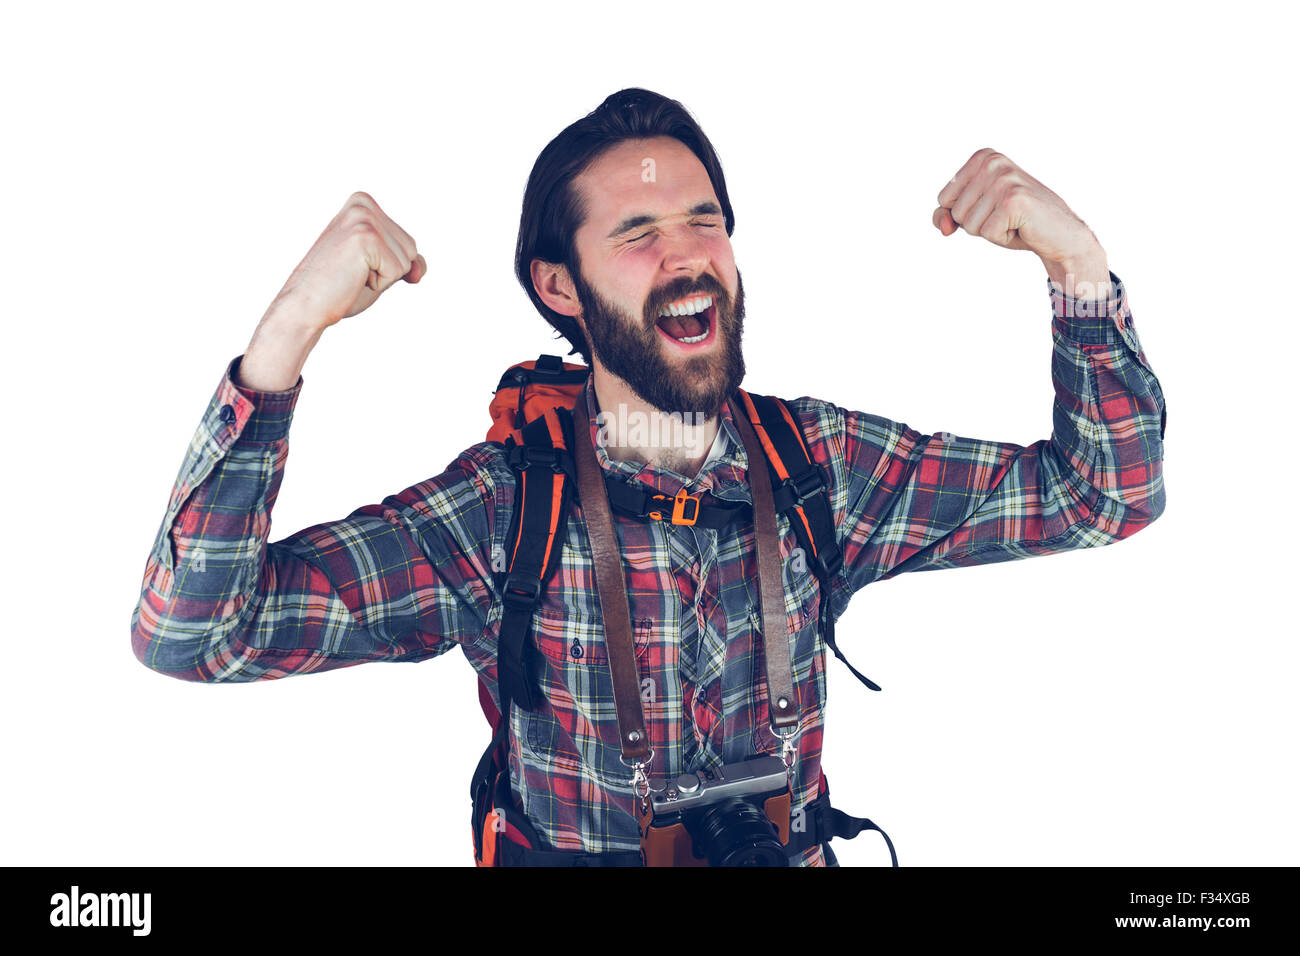 Excited adventurer with arms raised Stock Photo